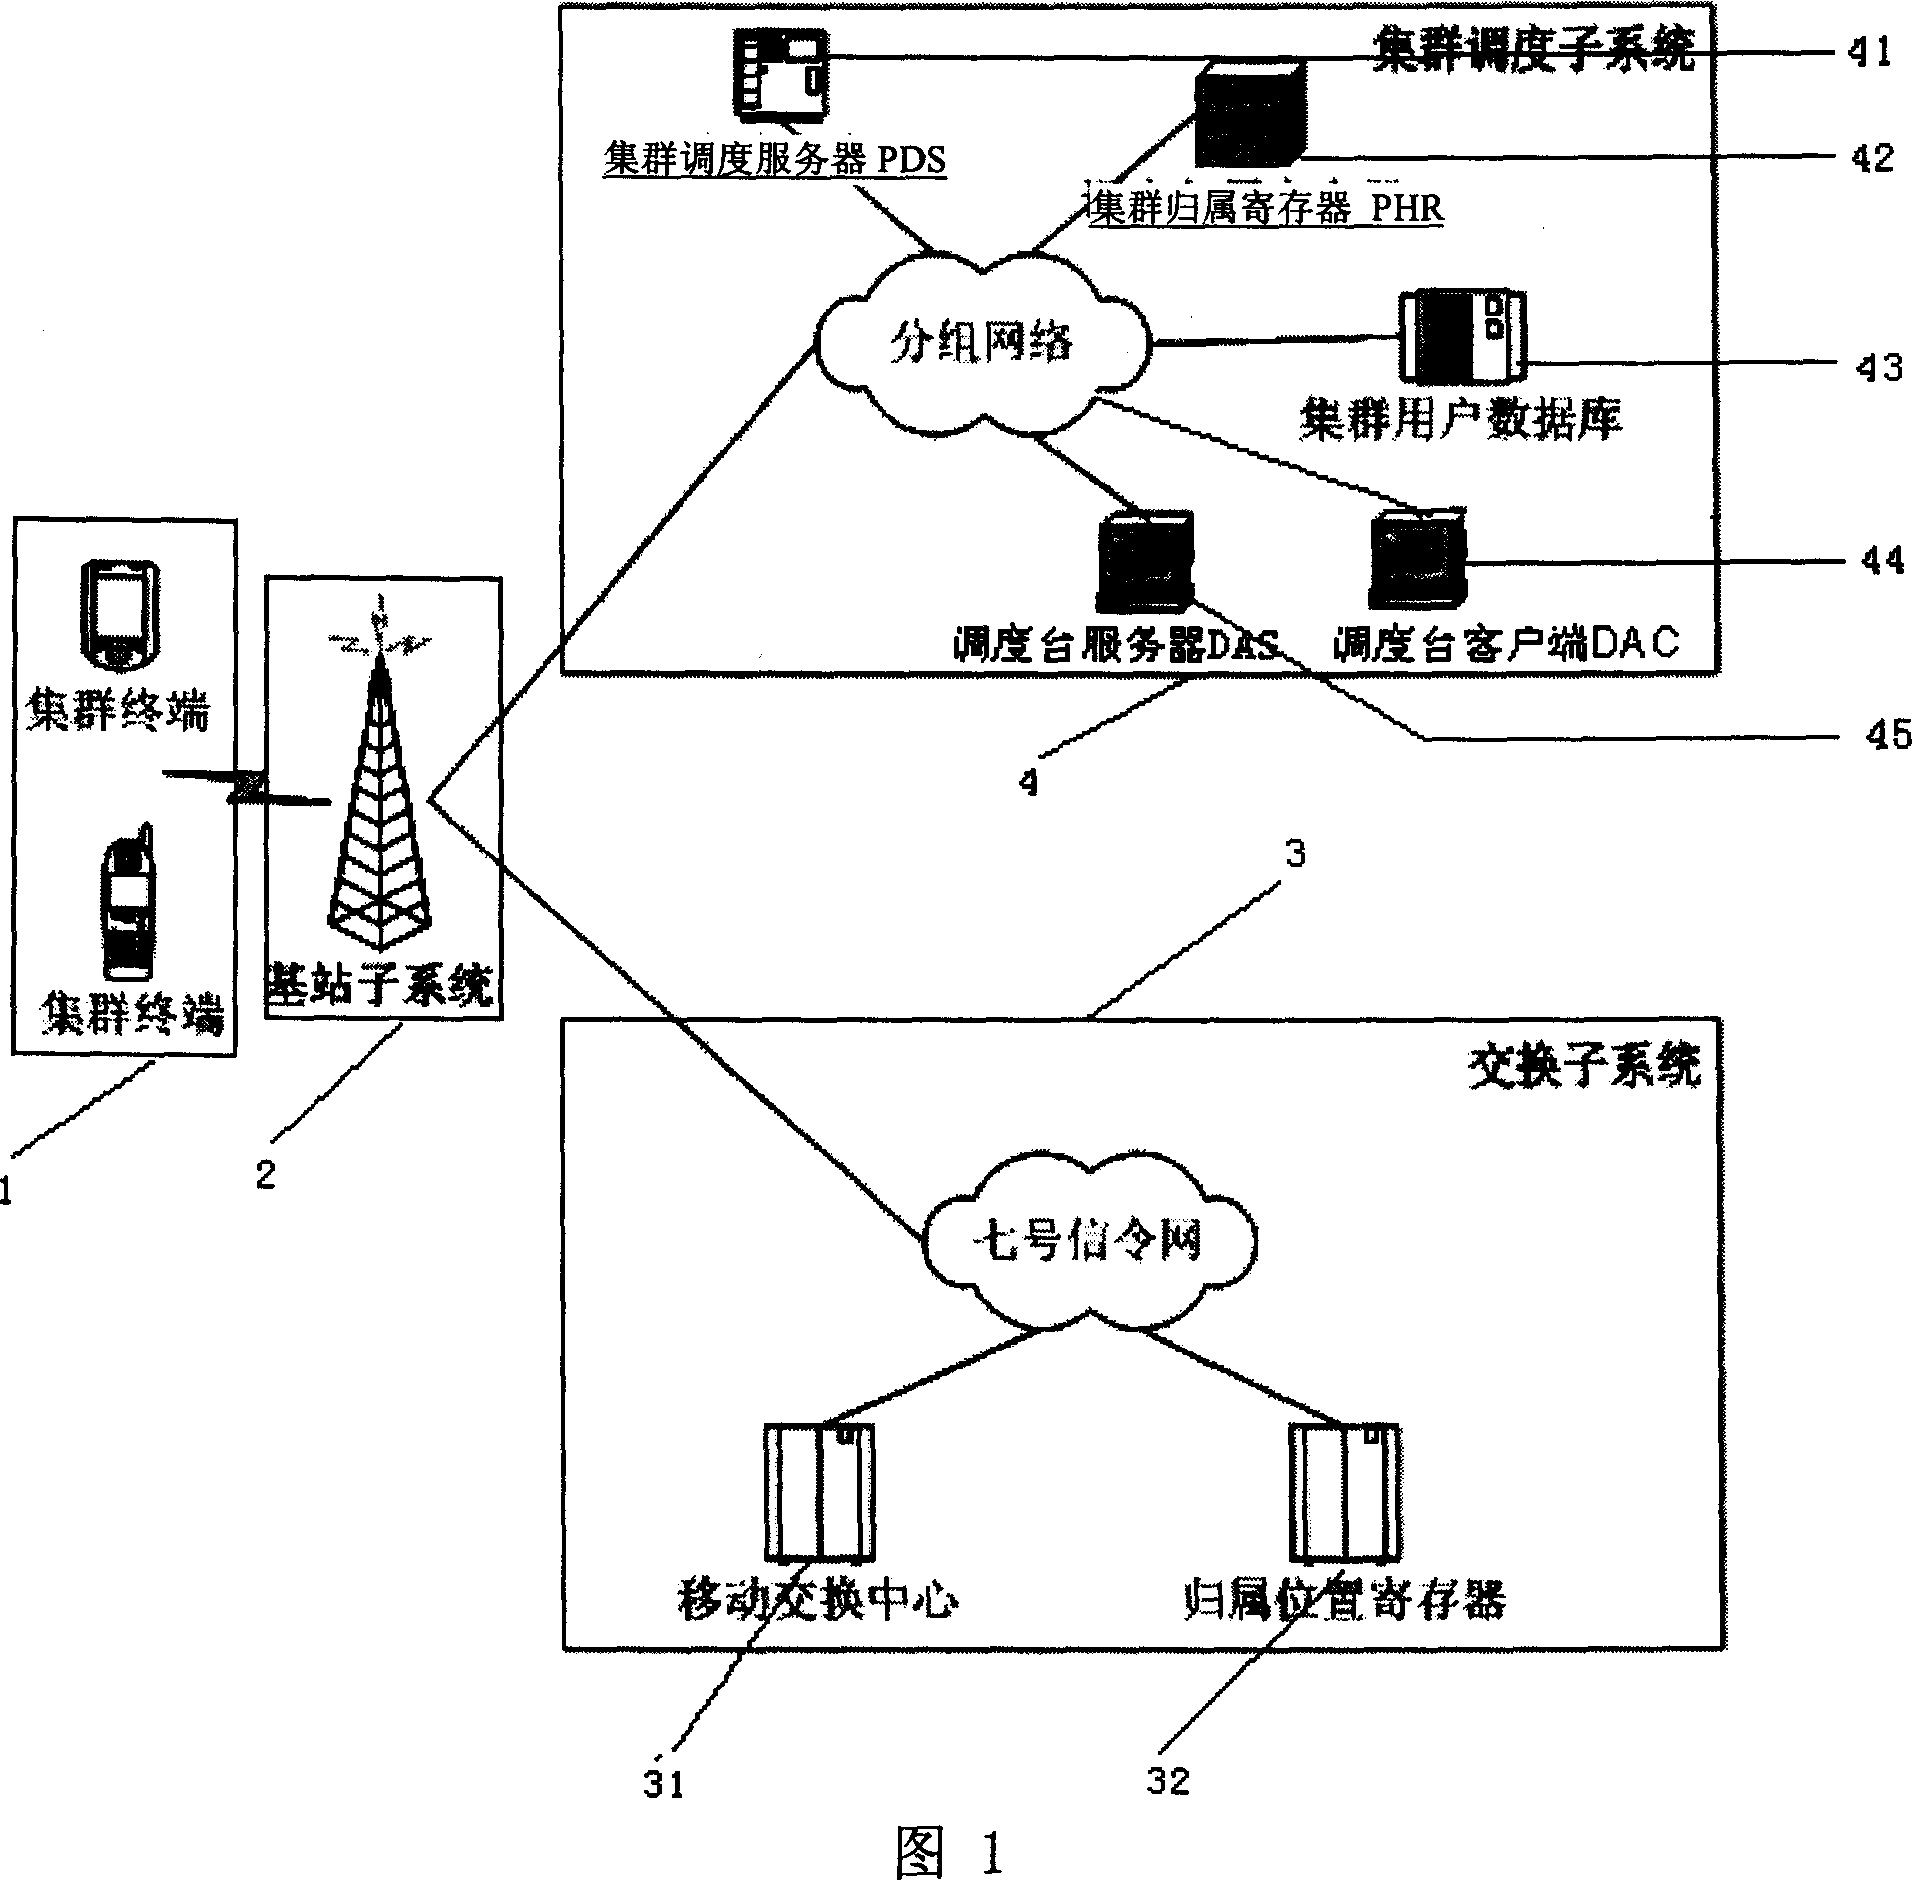 Realizing method for packet member to perform temporary scheduling by digital cluster communication system